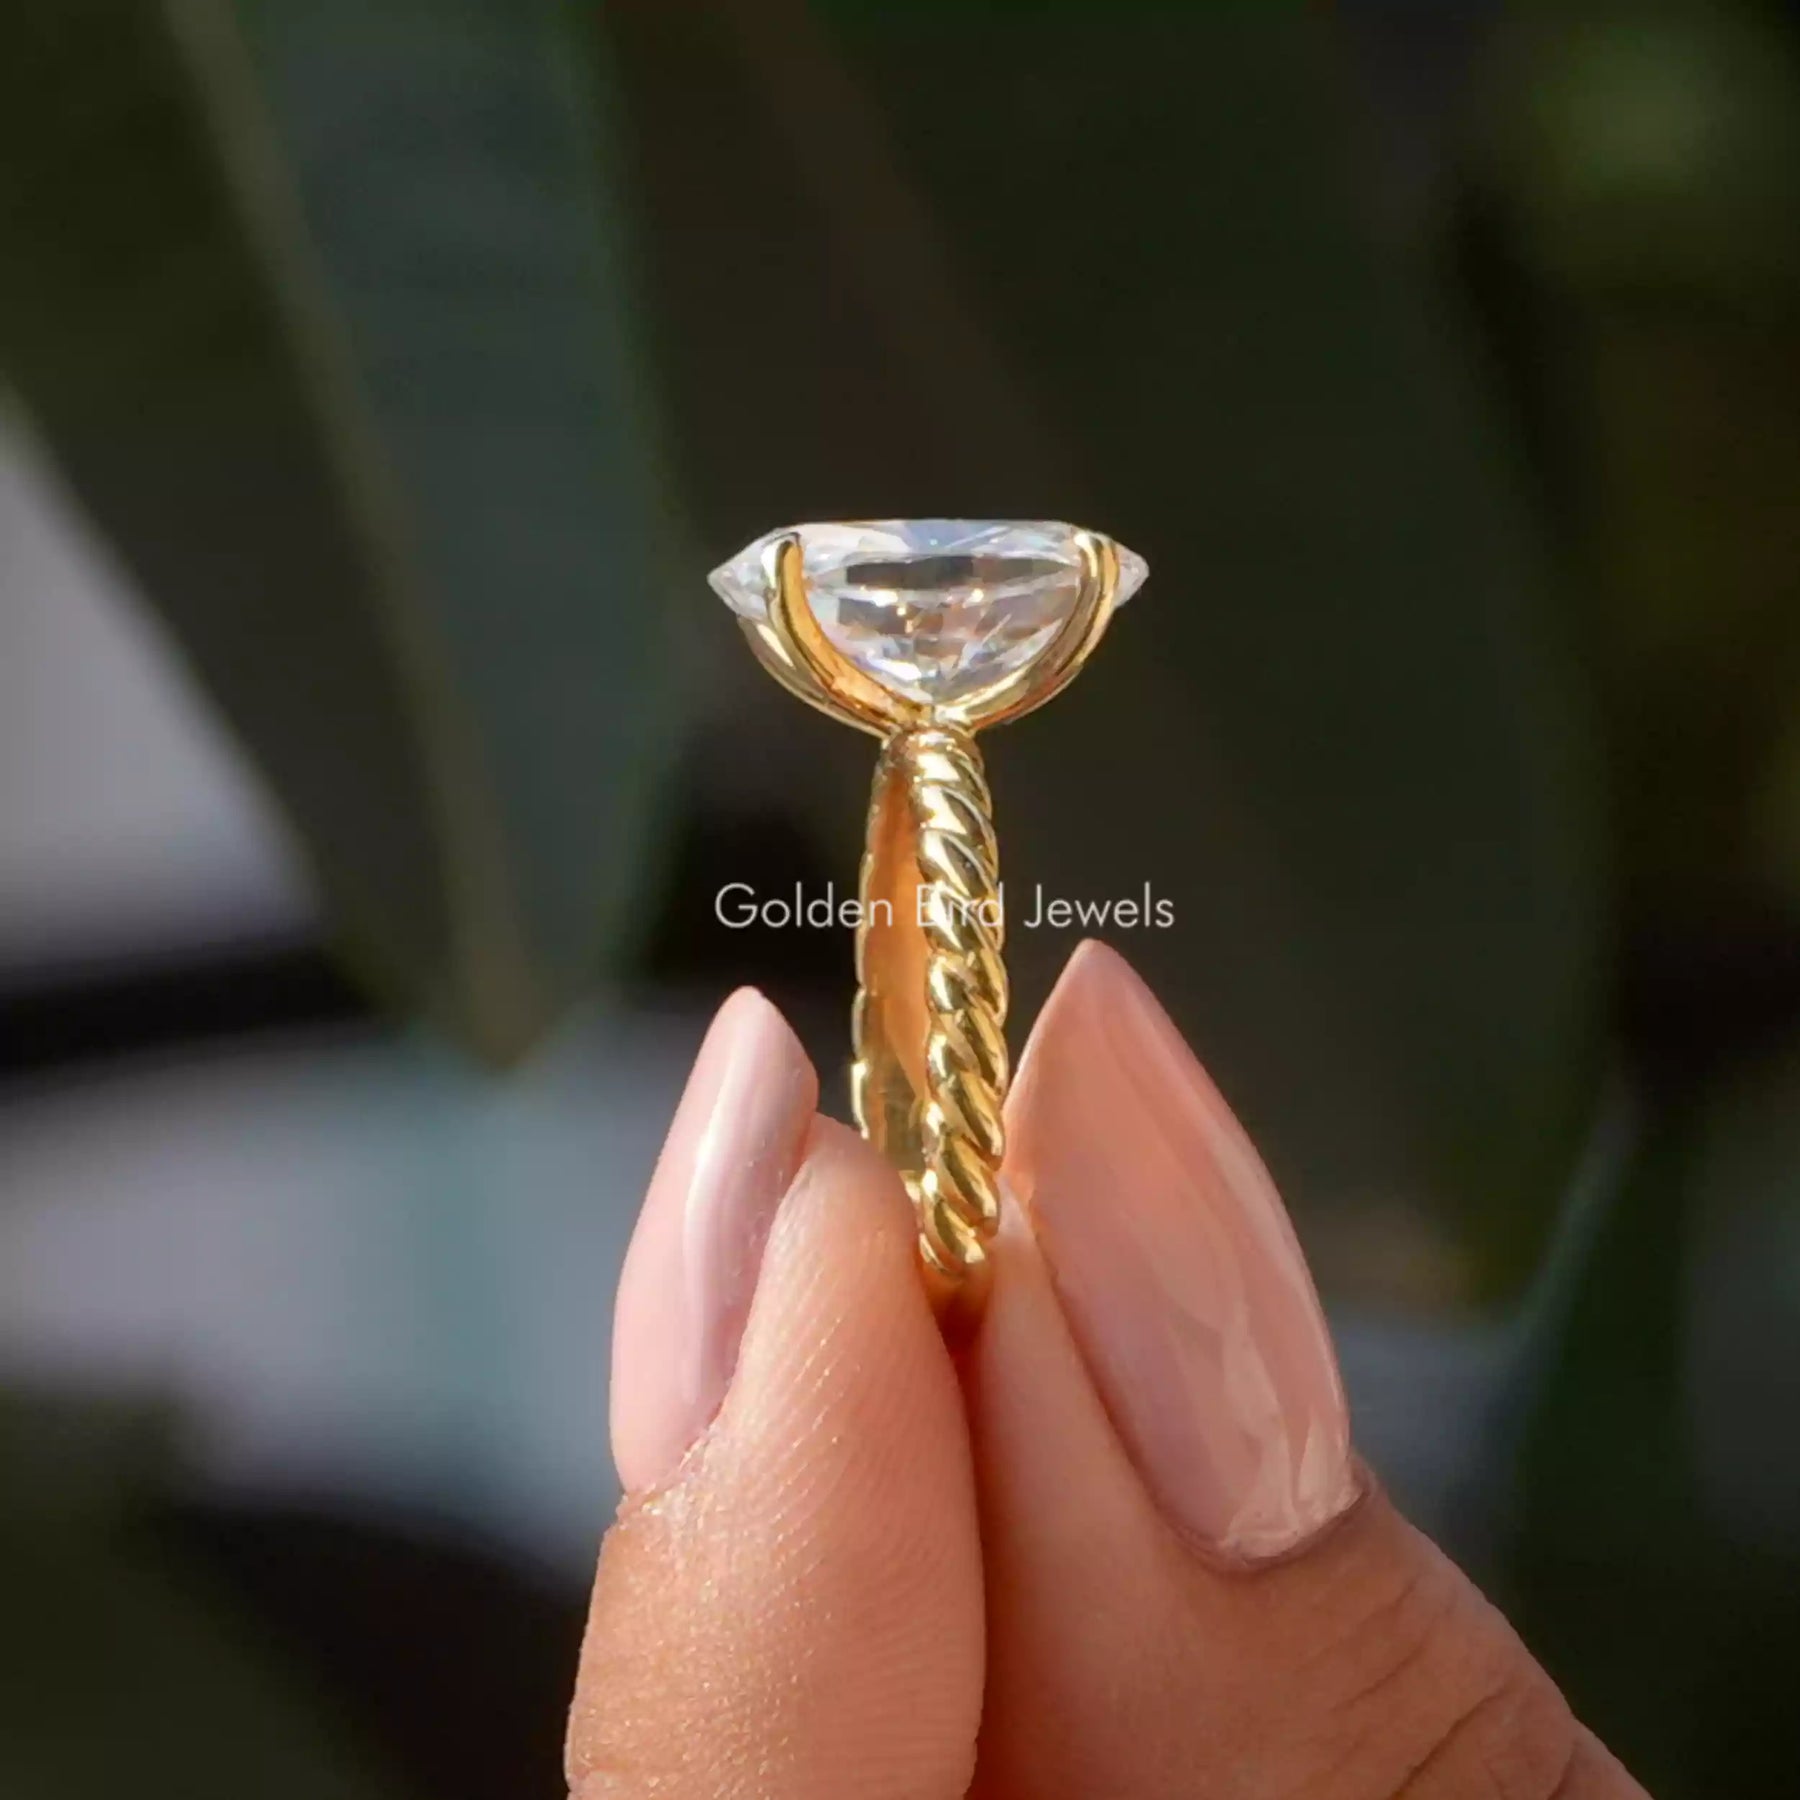 [Side view of oval cut solitaire moissanite ring]-[Golden Bird Jewels]